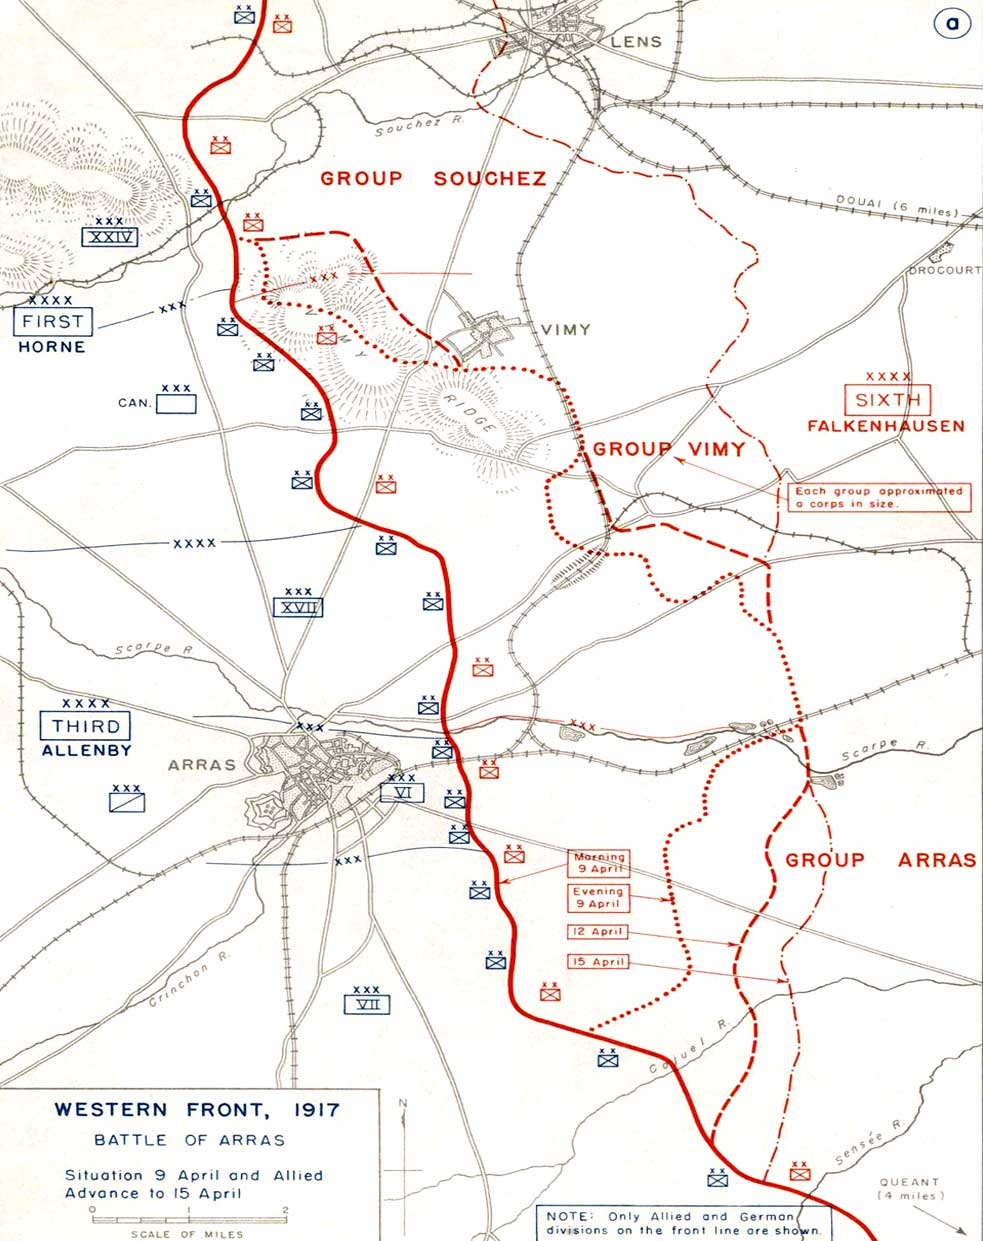 Front lines at Arras prior to the assault